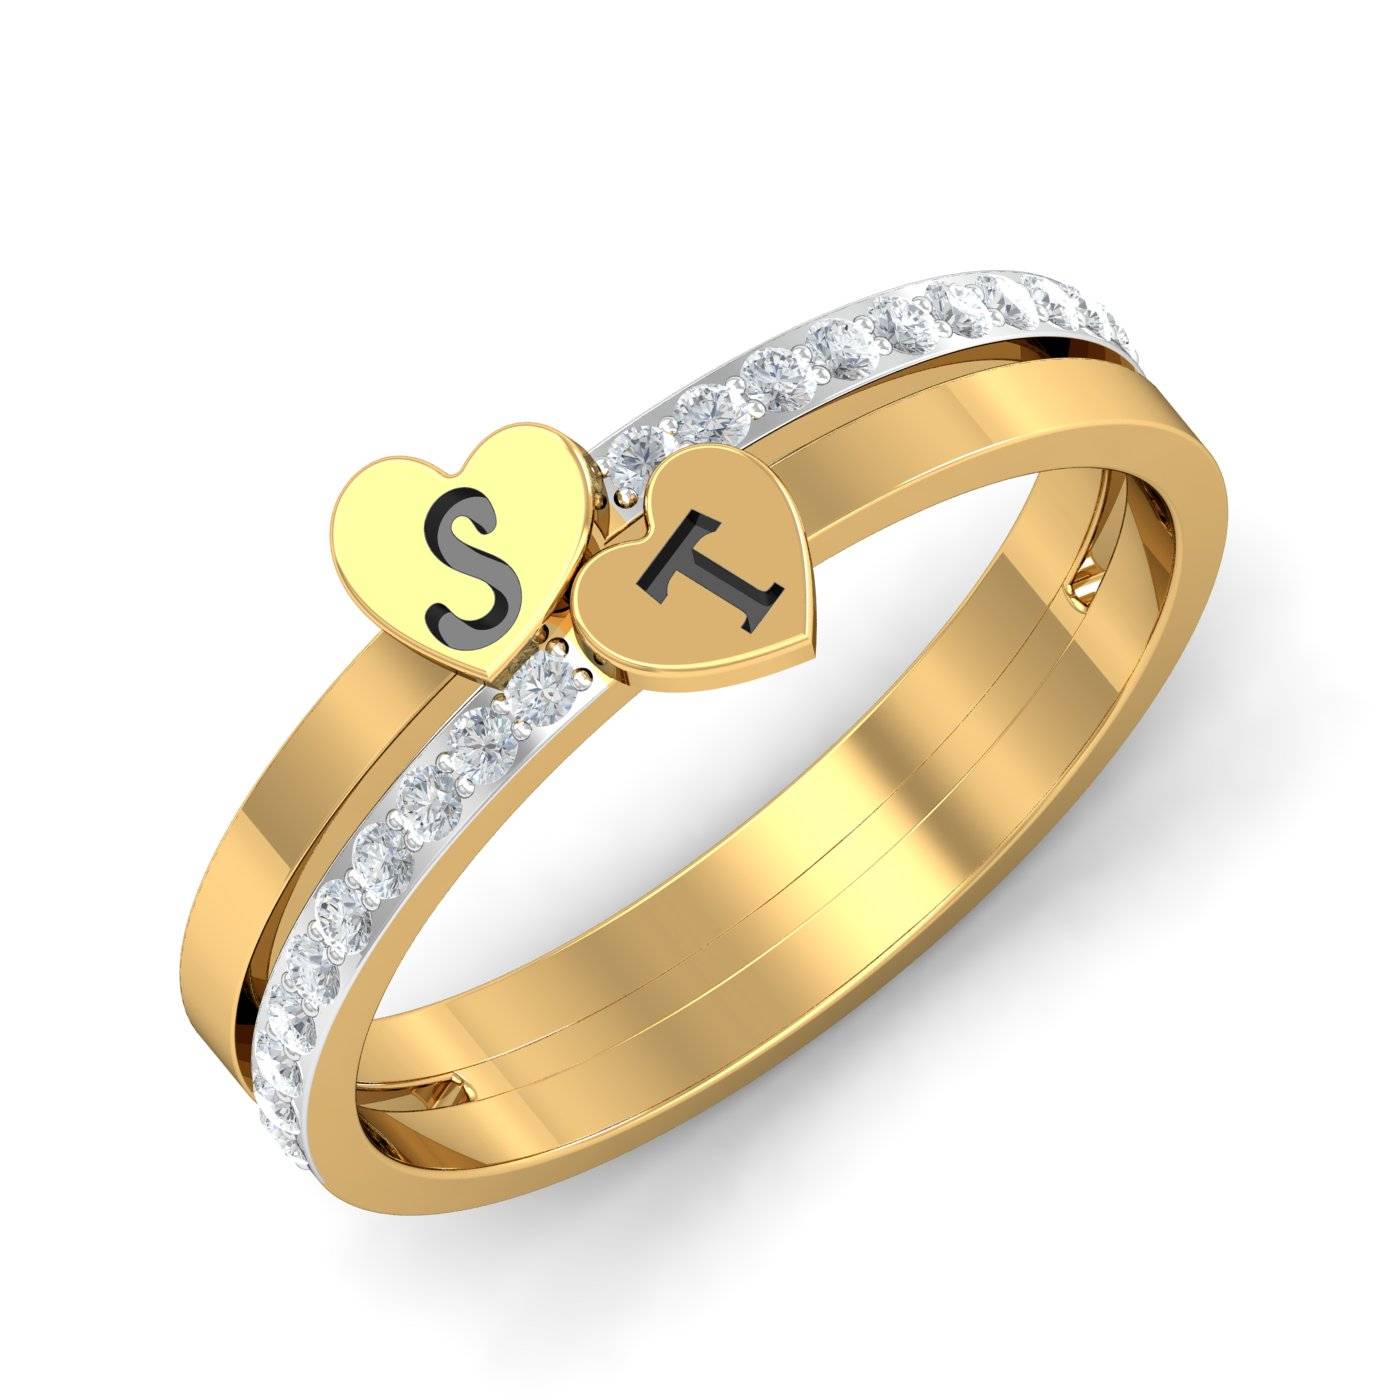 Personalized Initials Heart Ring